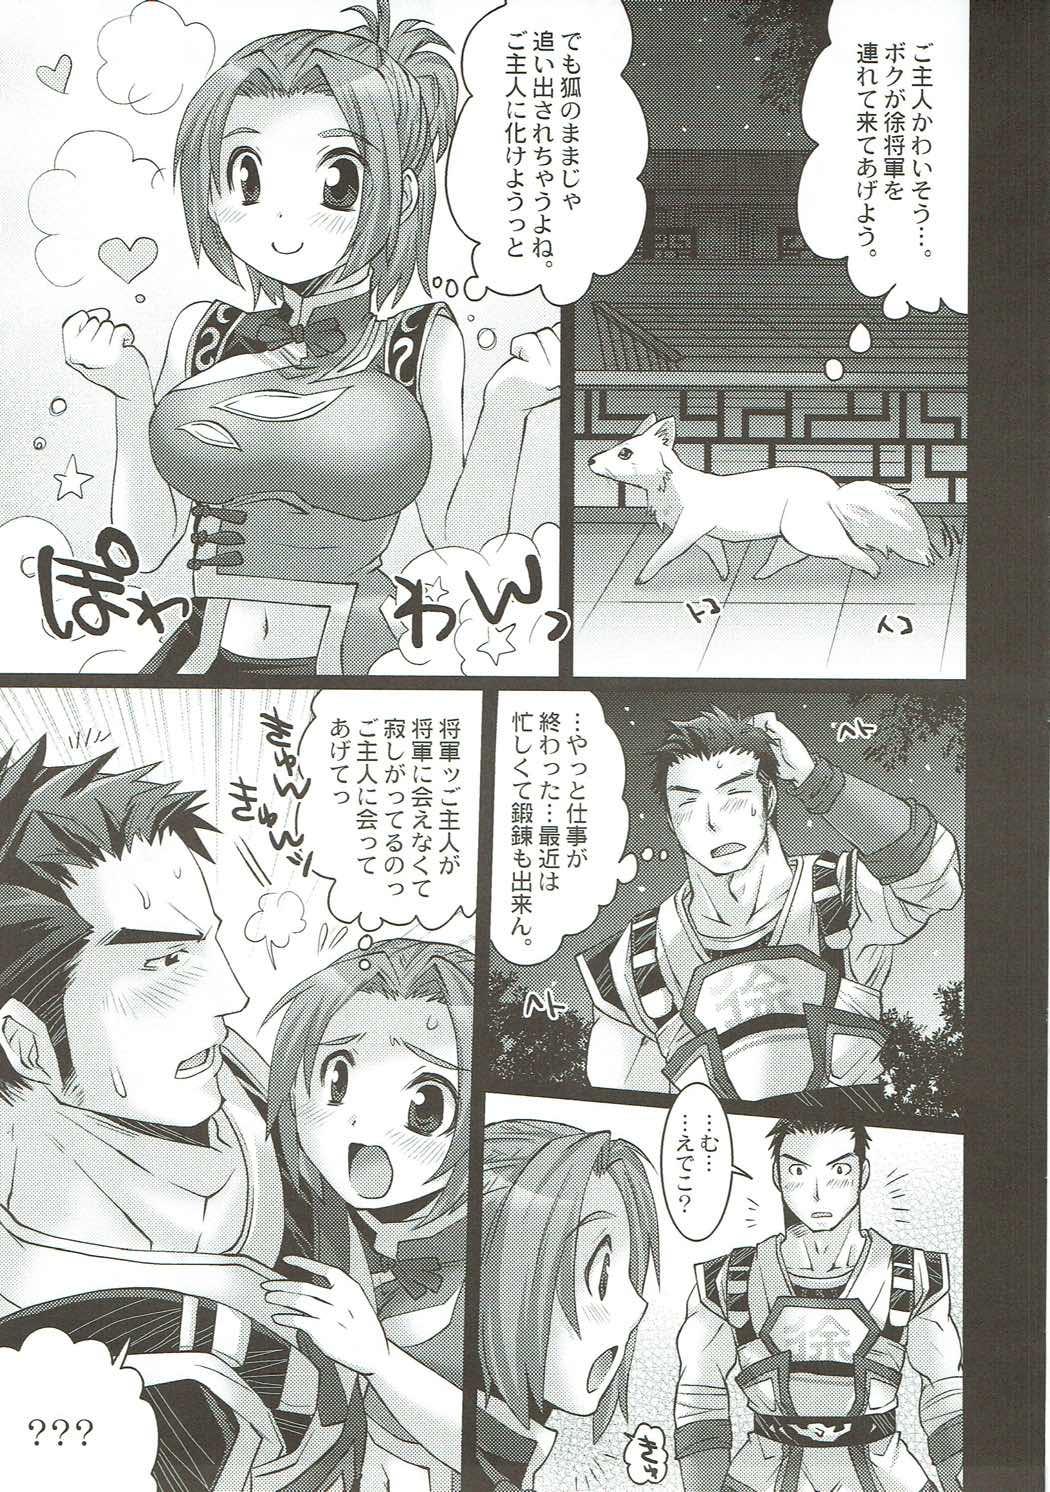 Str8 H.A.O Colle 2 - Dynasty warriors Fantasy - Page 4